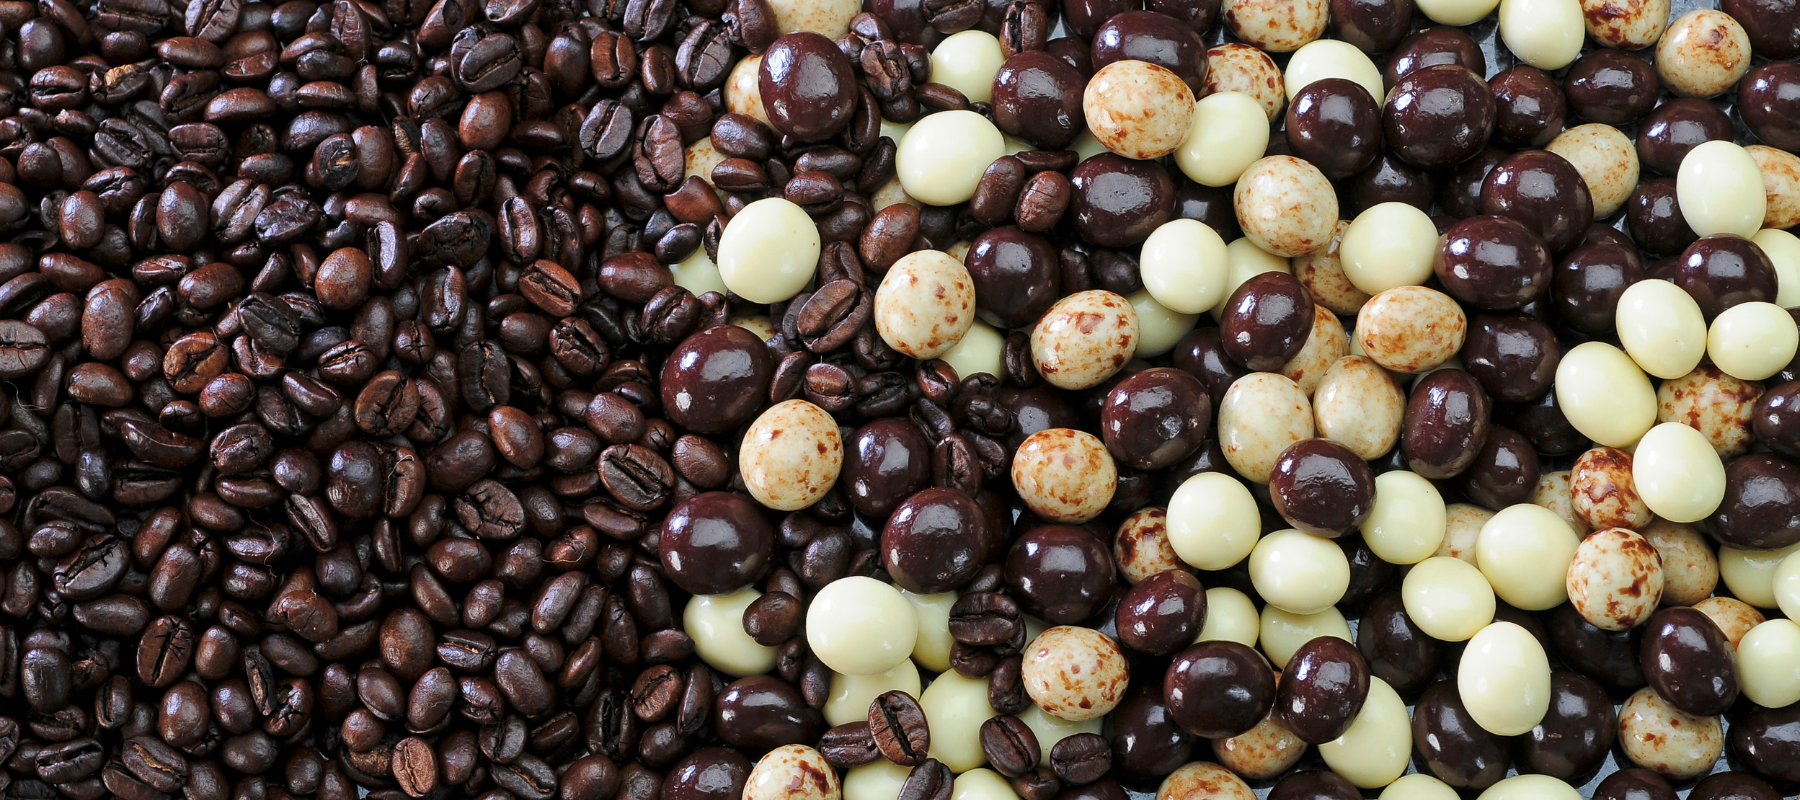 Dilettante Chocolates Espresso Beans mixed with Dilettante's own specialty bean blend